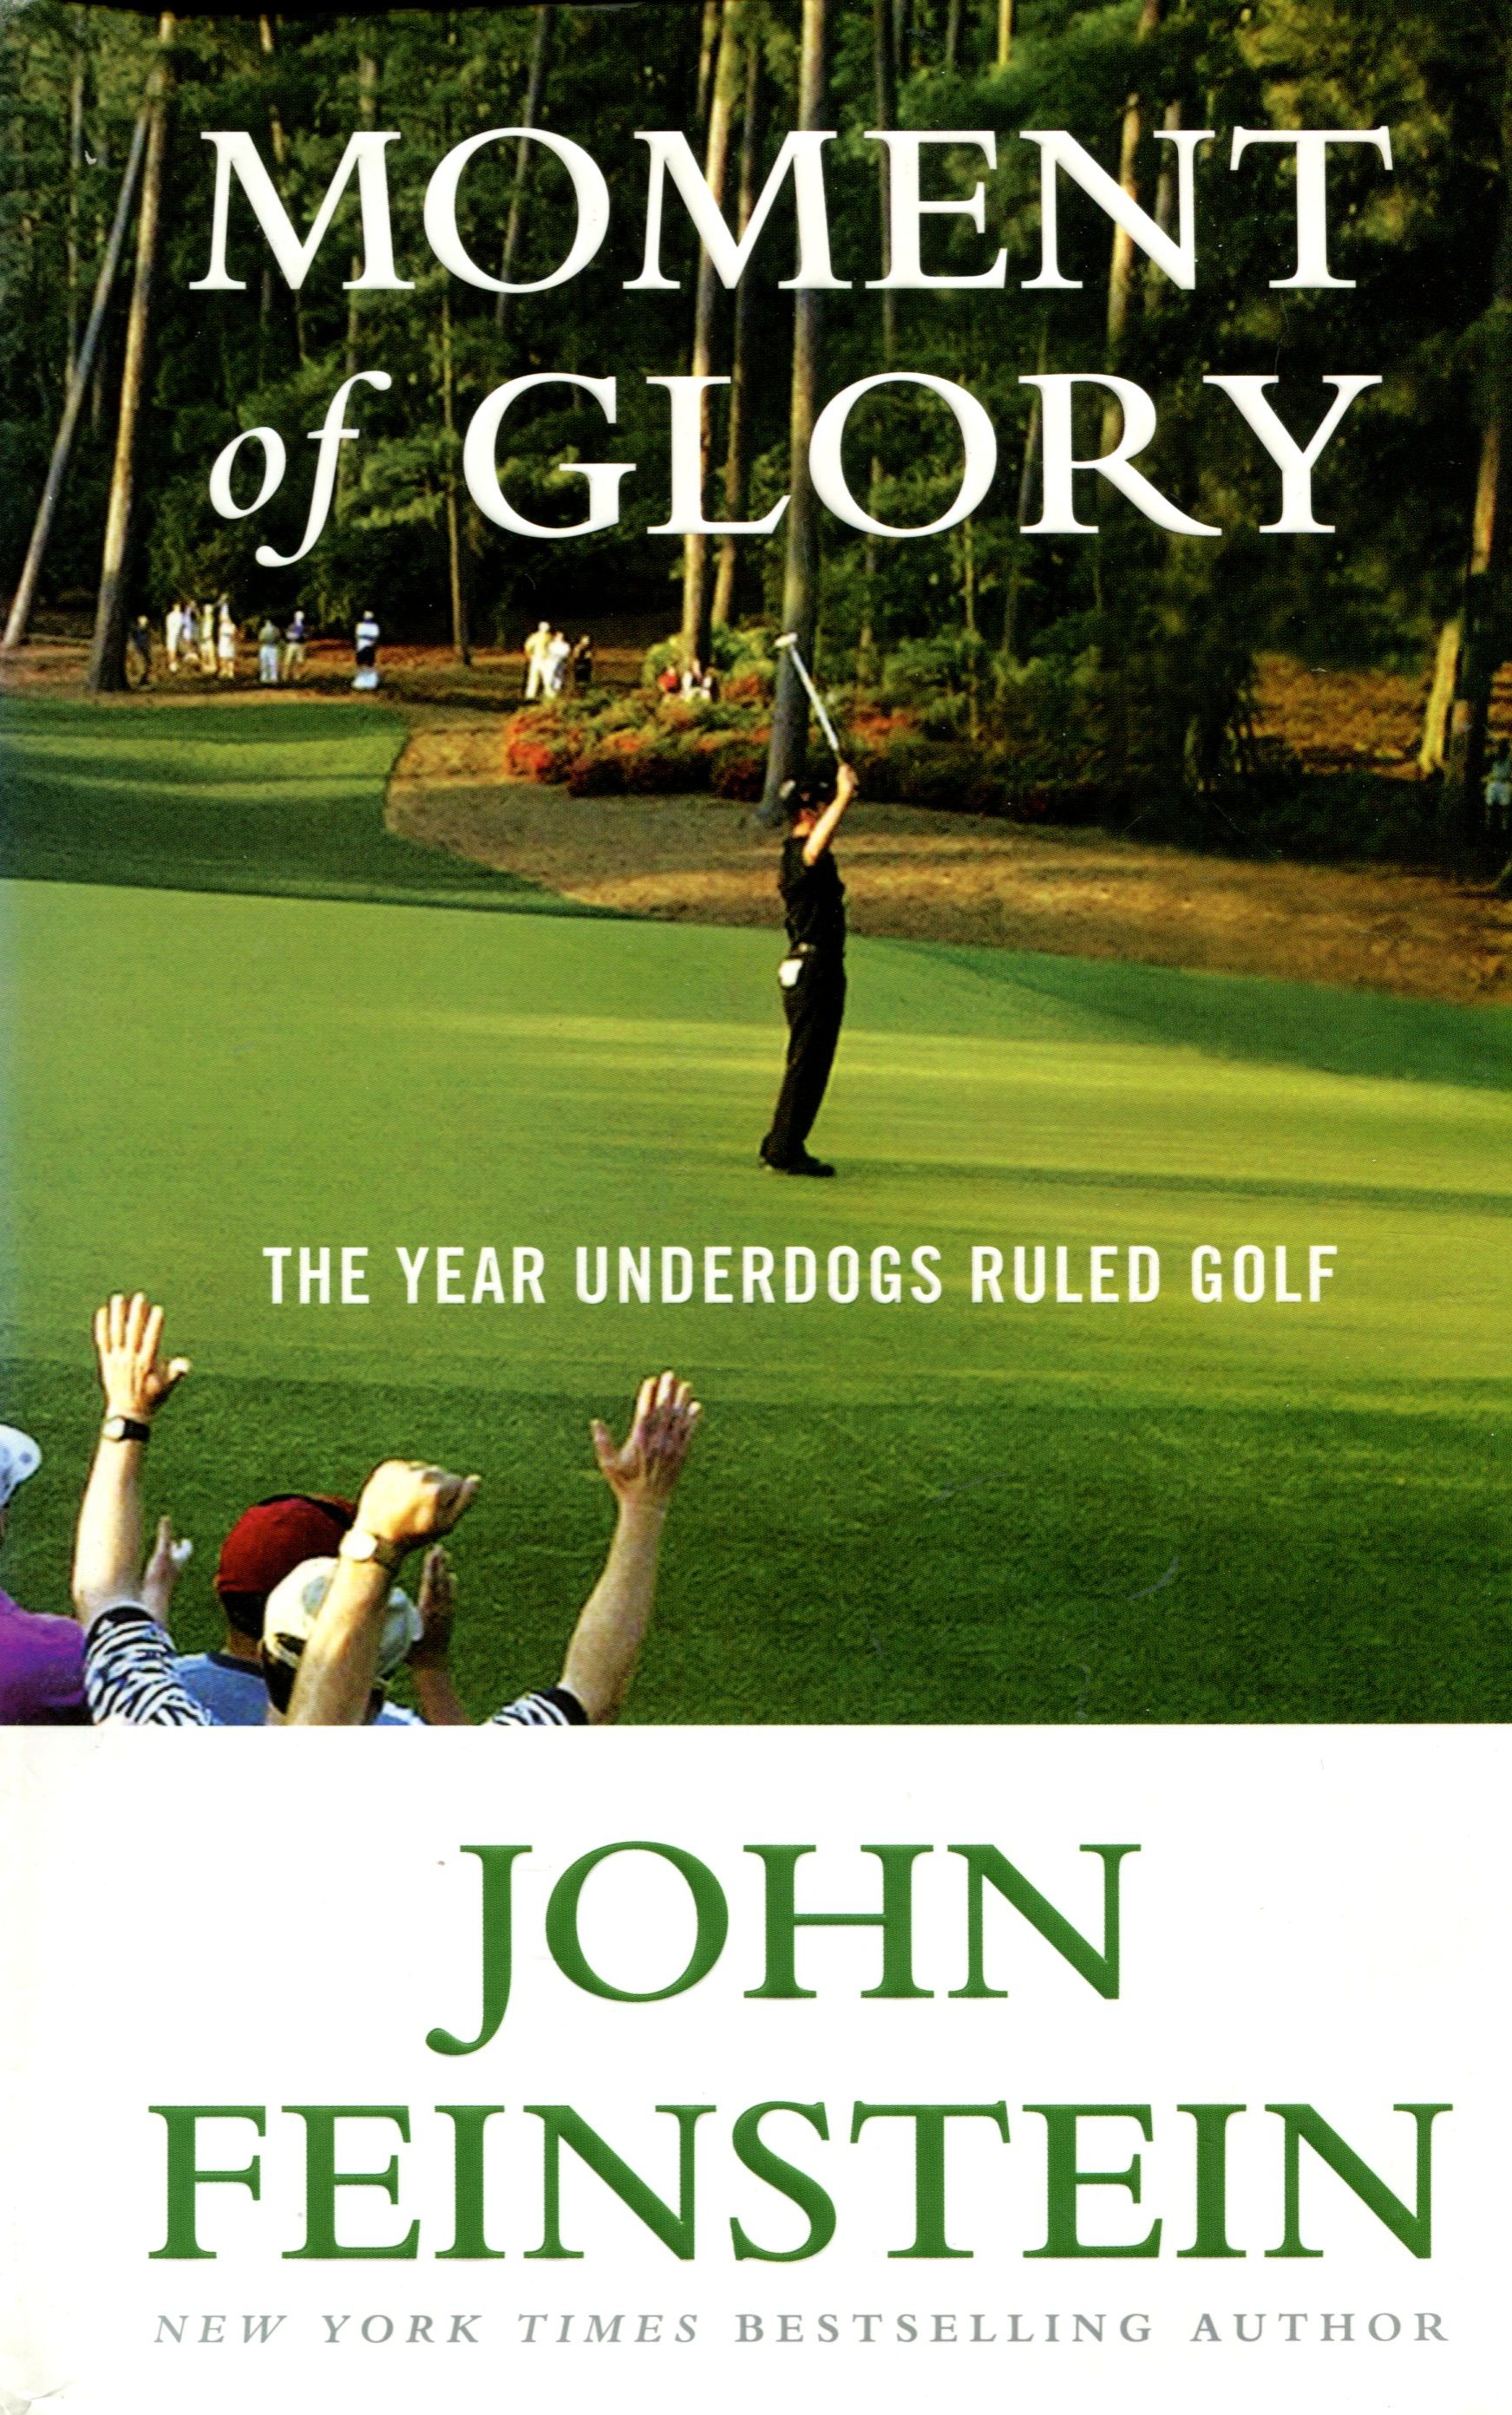 The cover of John Feisteins book "Moment of Glory, the year the underdogs ruled golf.